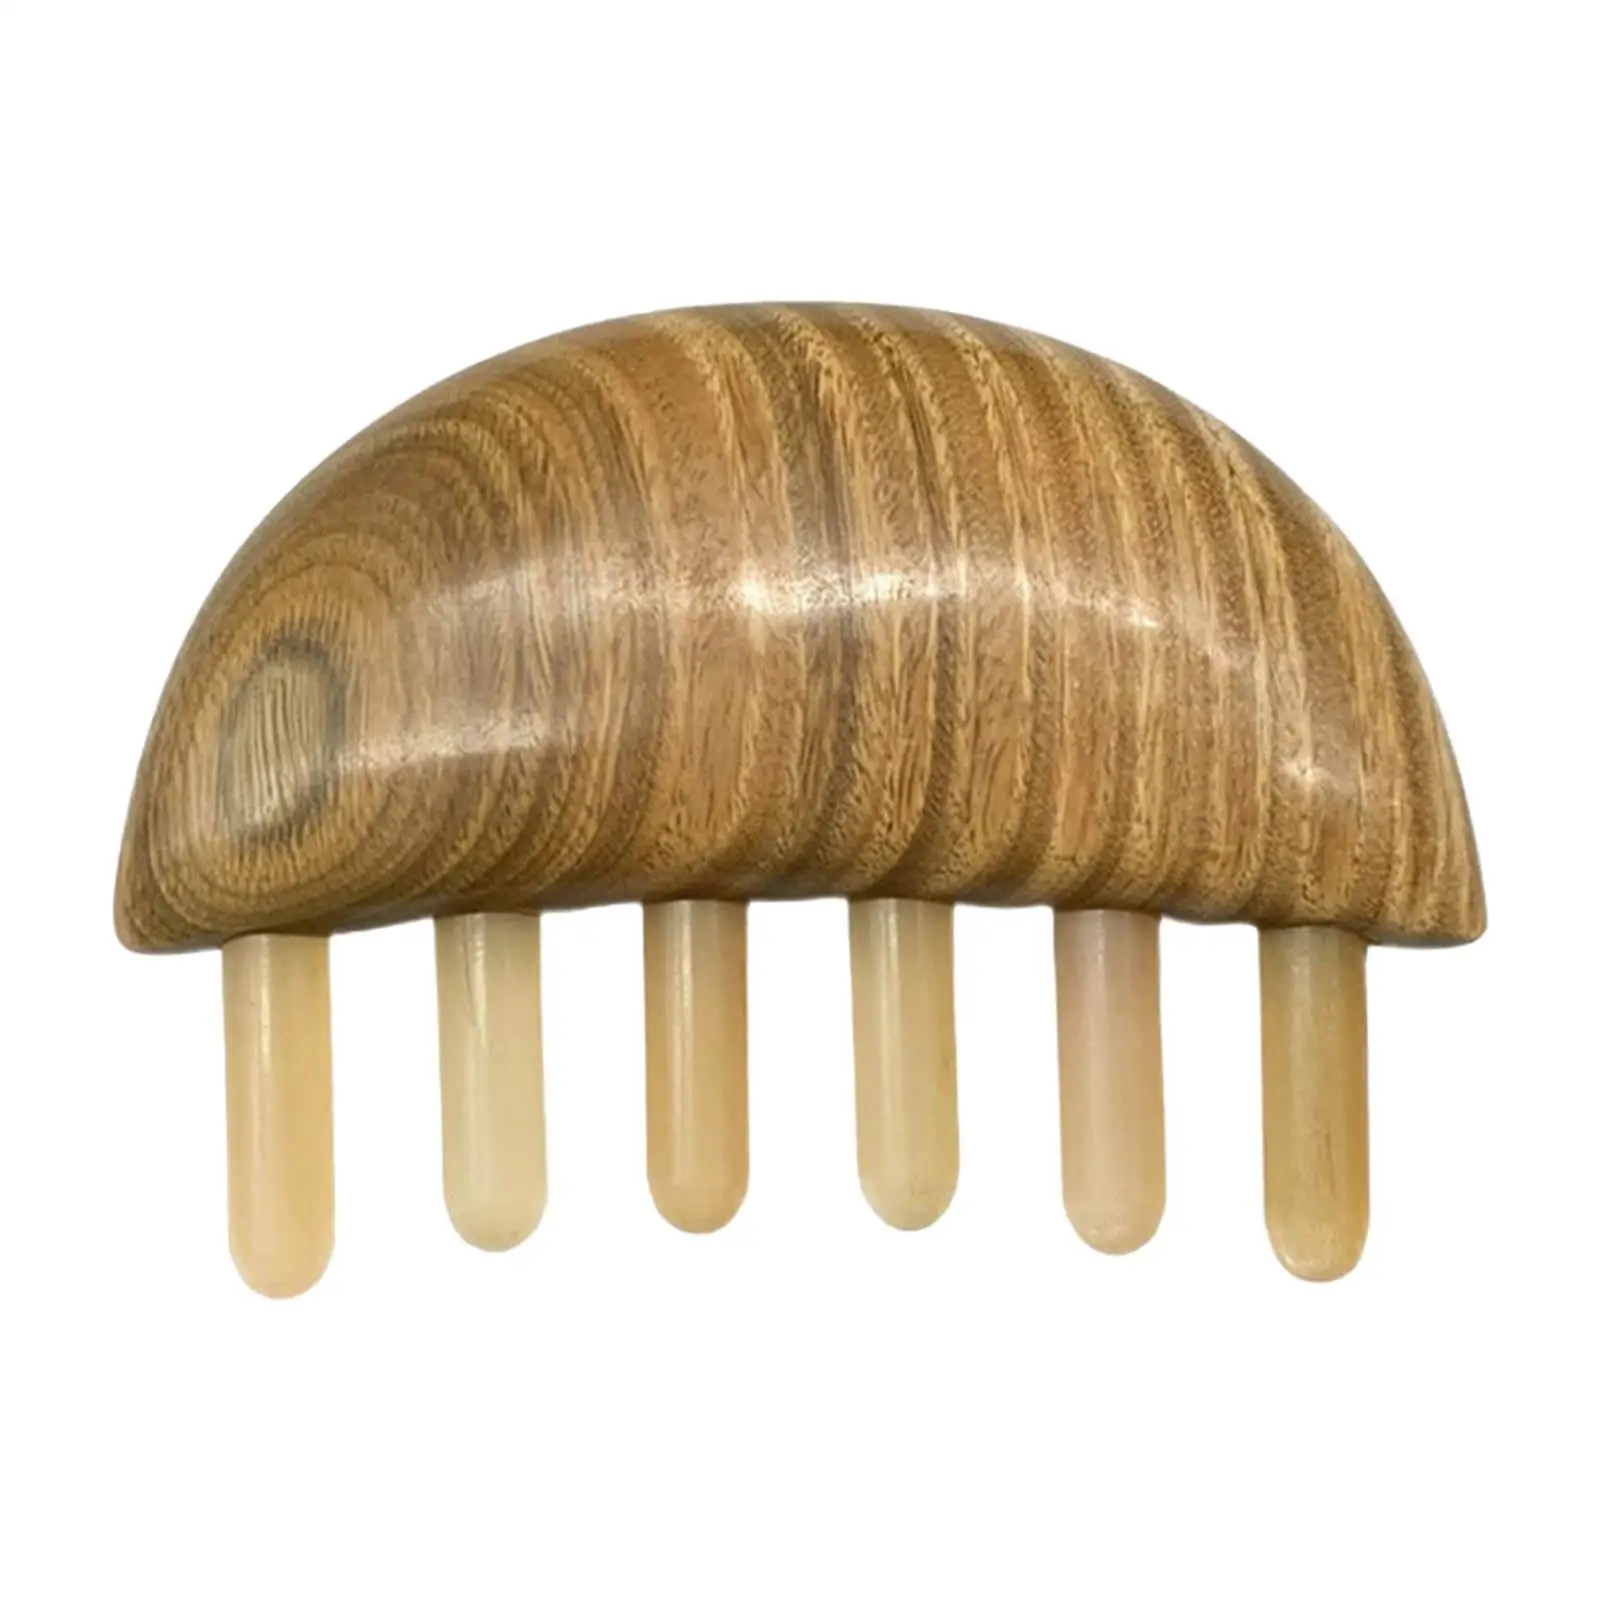 Wooden Horn Material Wide Tooth Hair Comb Perfect Gift for Parents, Lovers, Friends, Children